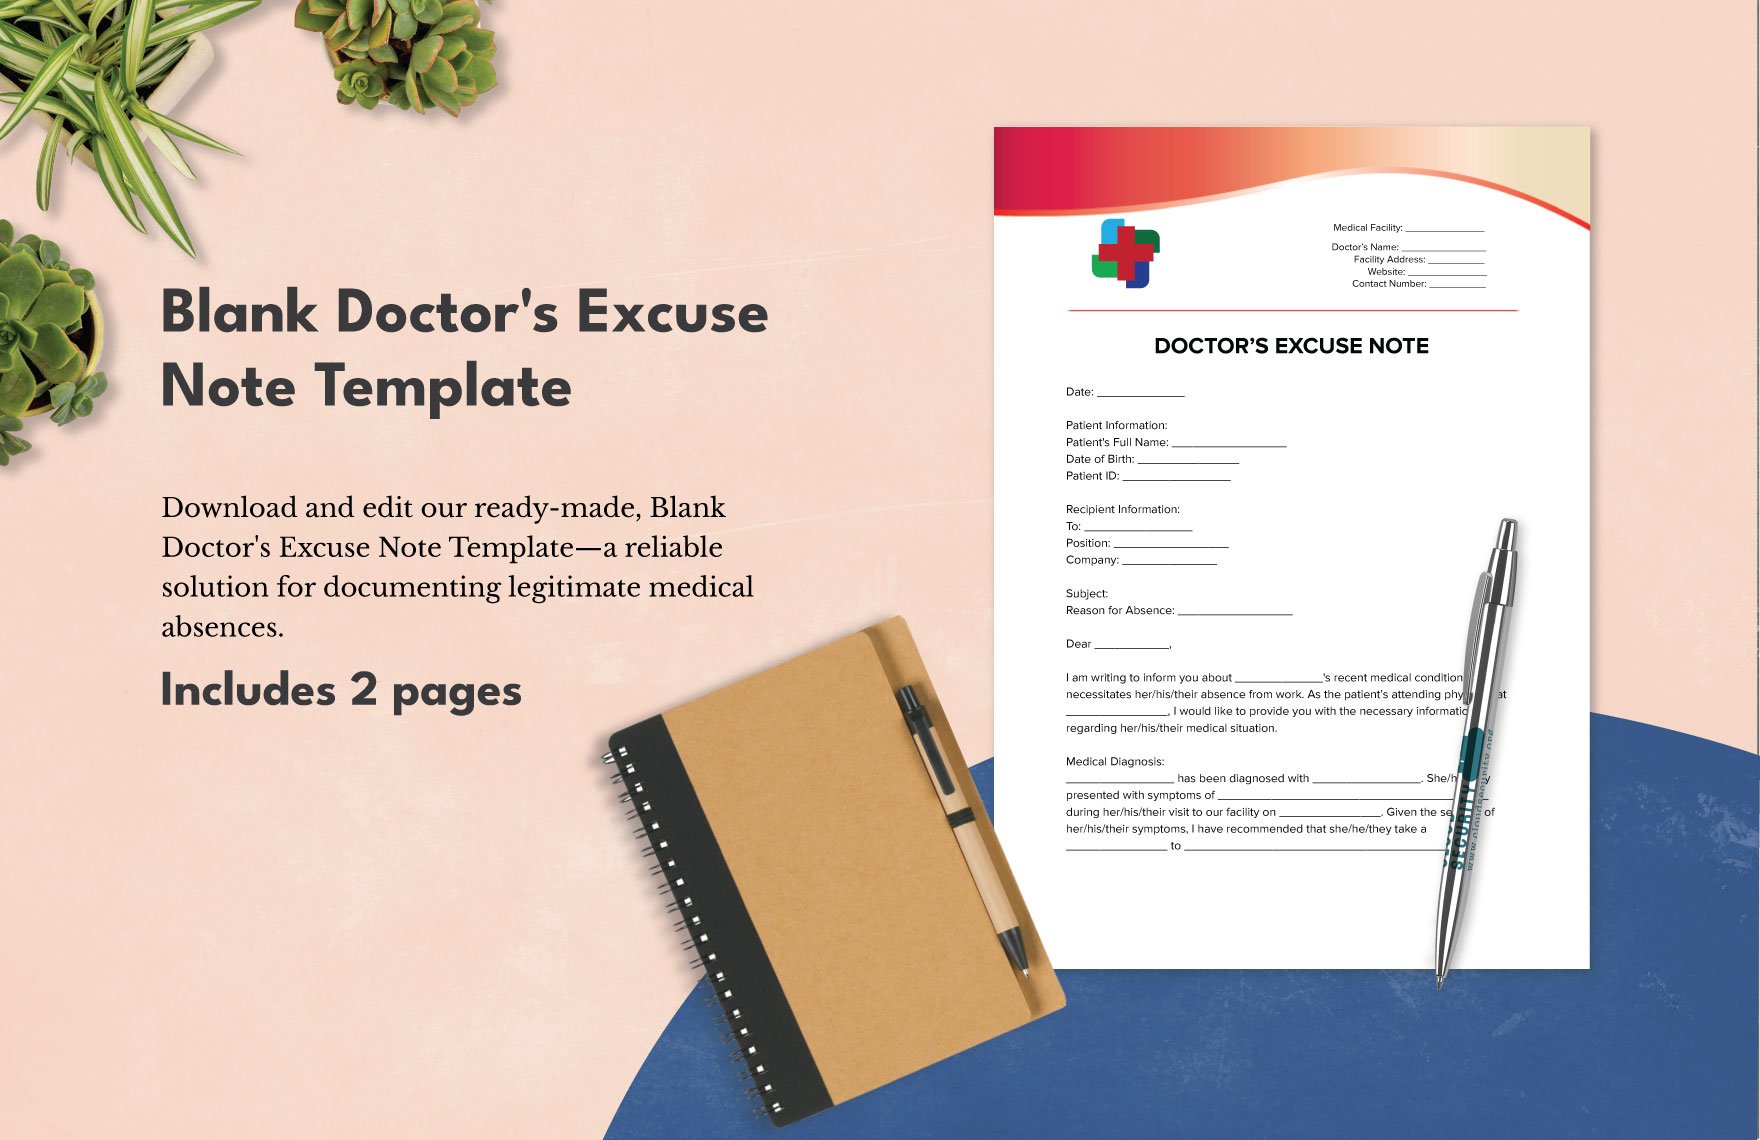 Blank Doctor's Excuse Note Template